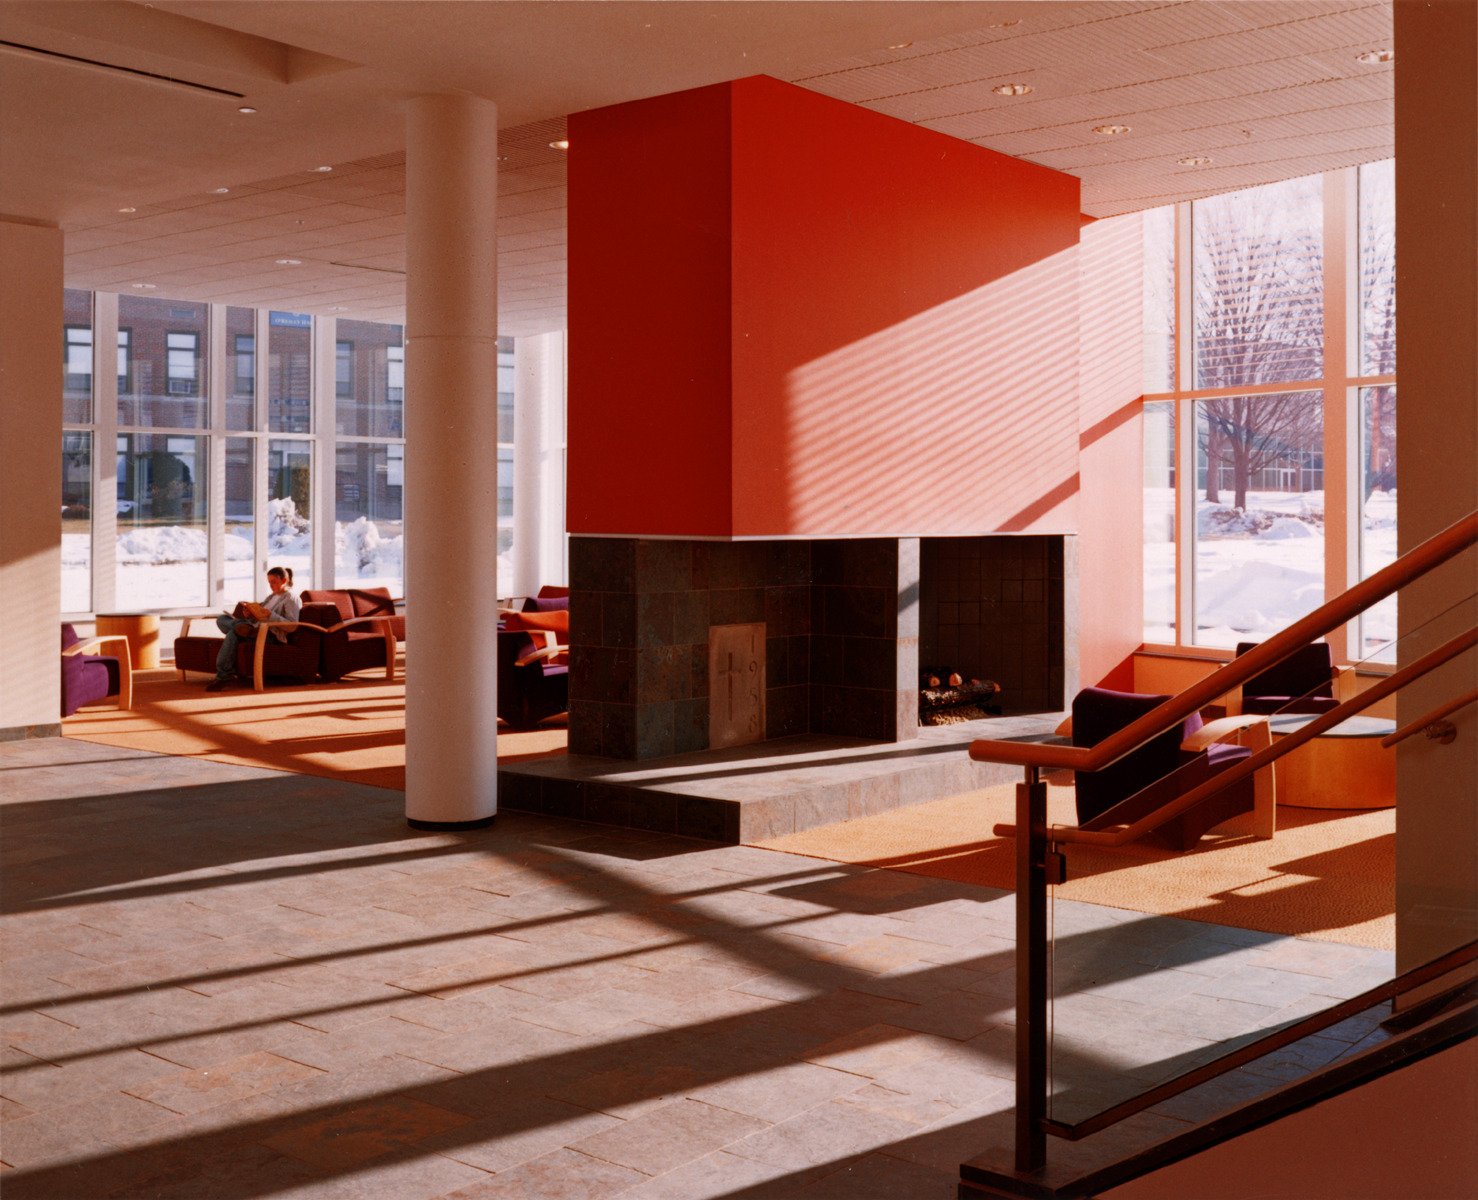 Color photo of a campus center interior. Red fireplace centers an expansive lounge. Outside, a snowy landscape.